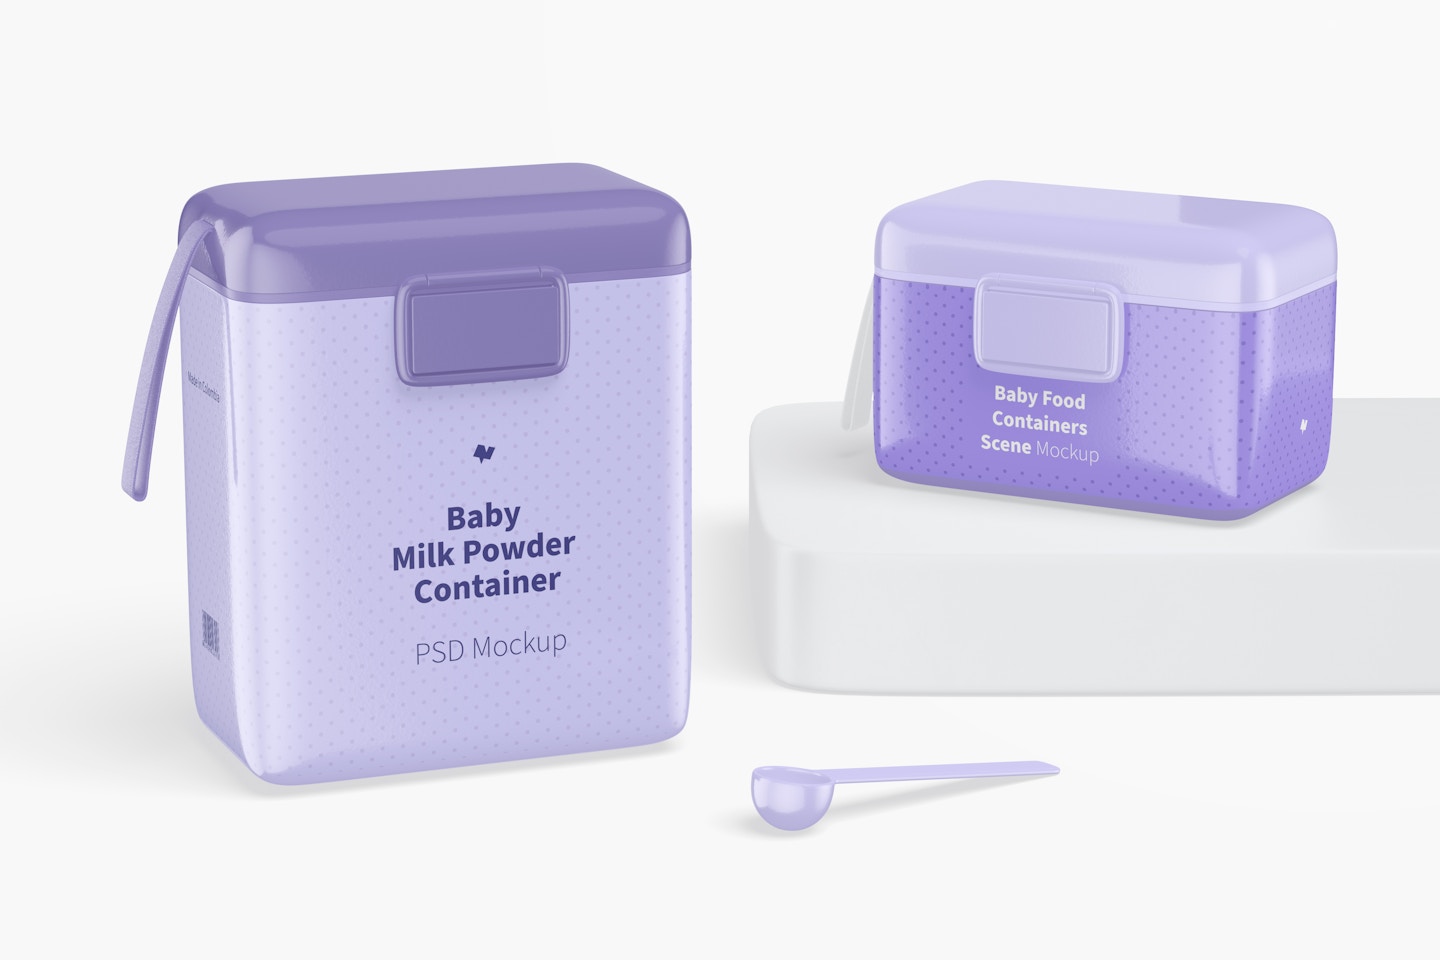 Baby Food Containers Scene Mockup, Left View